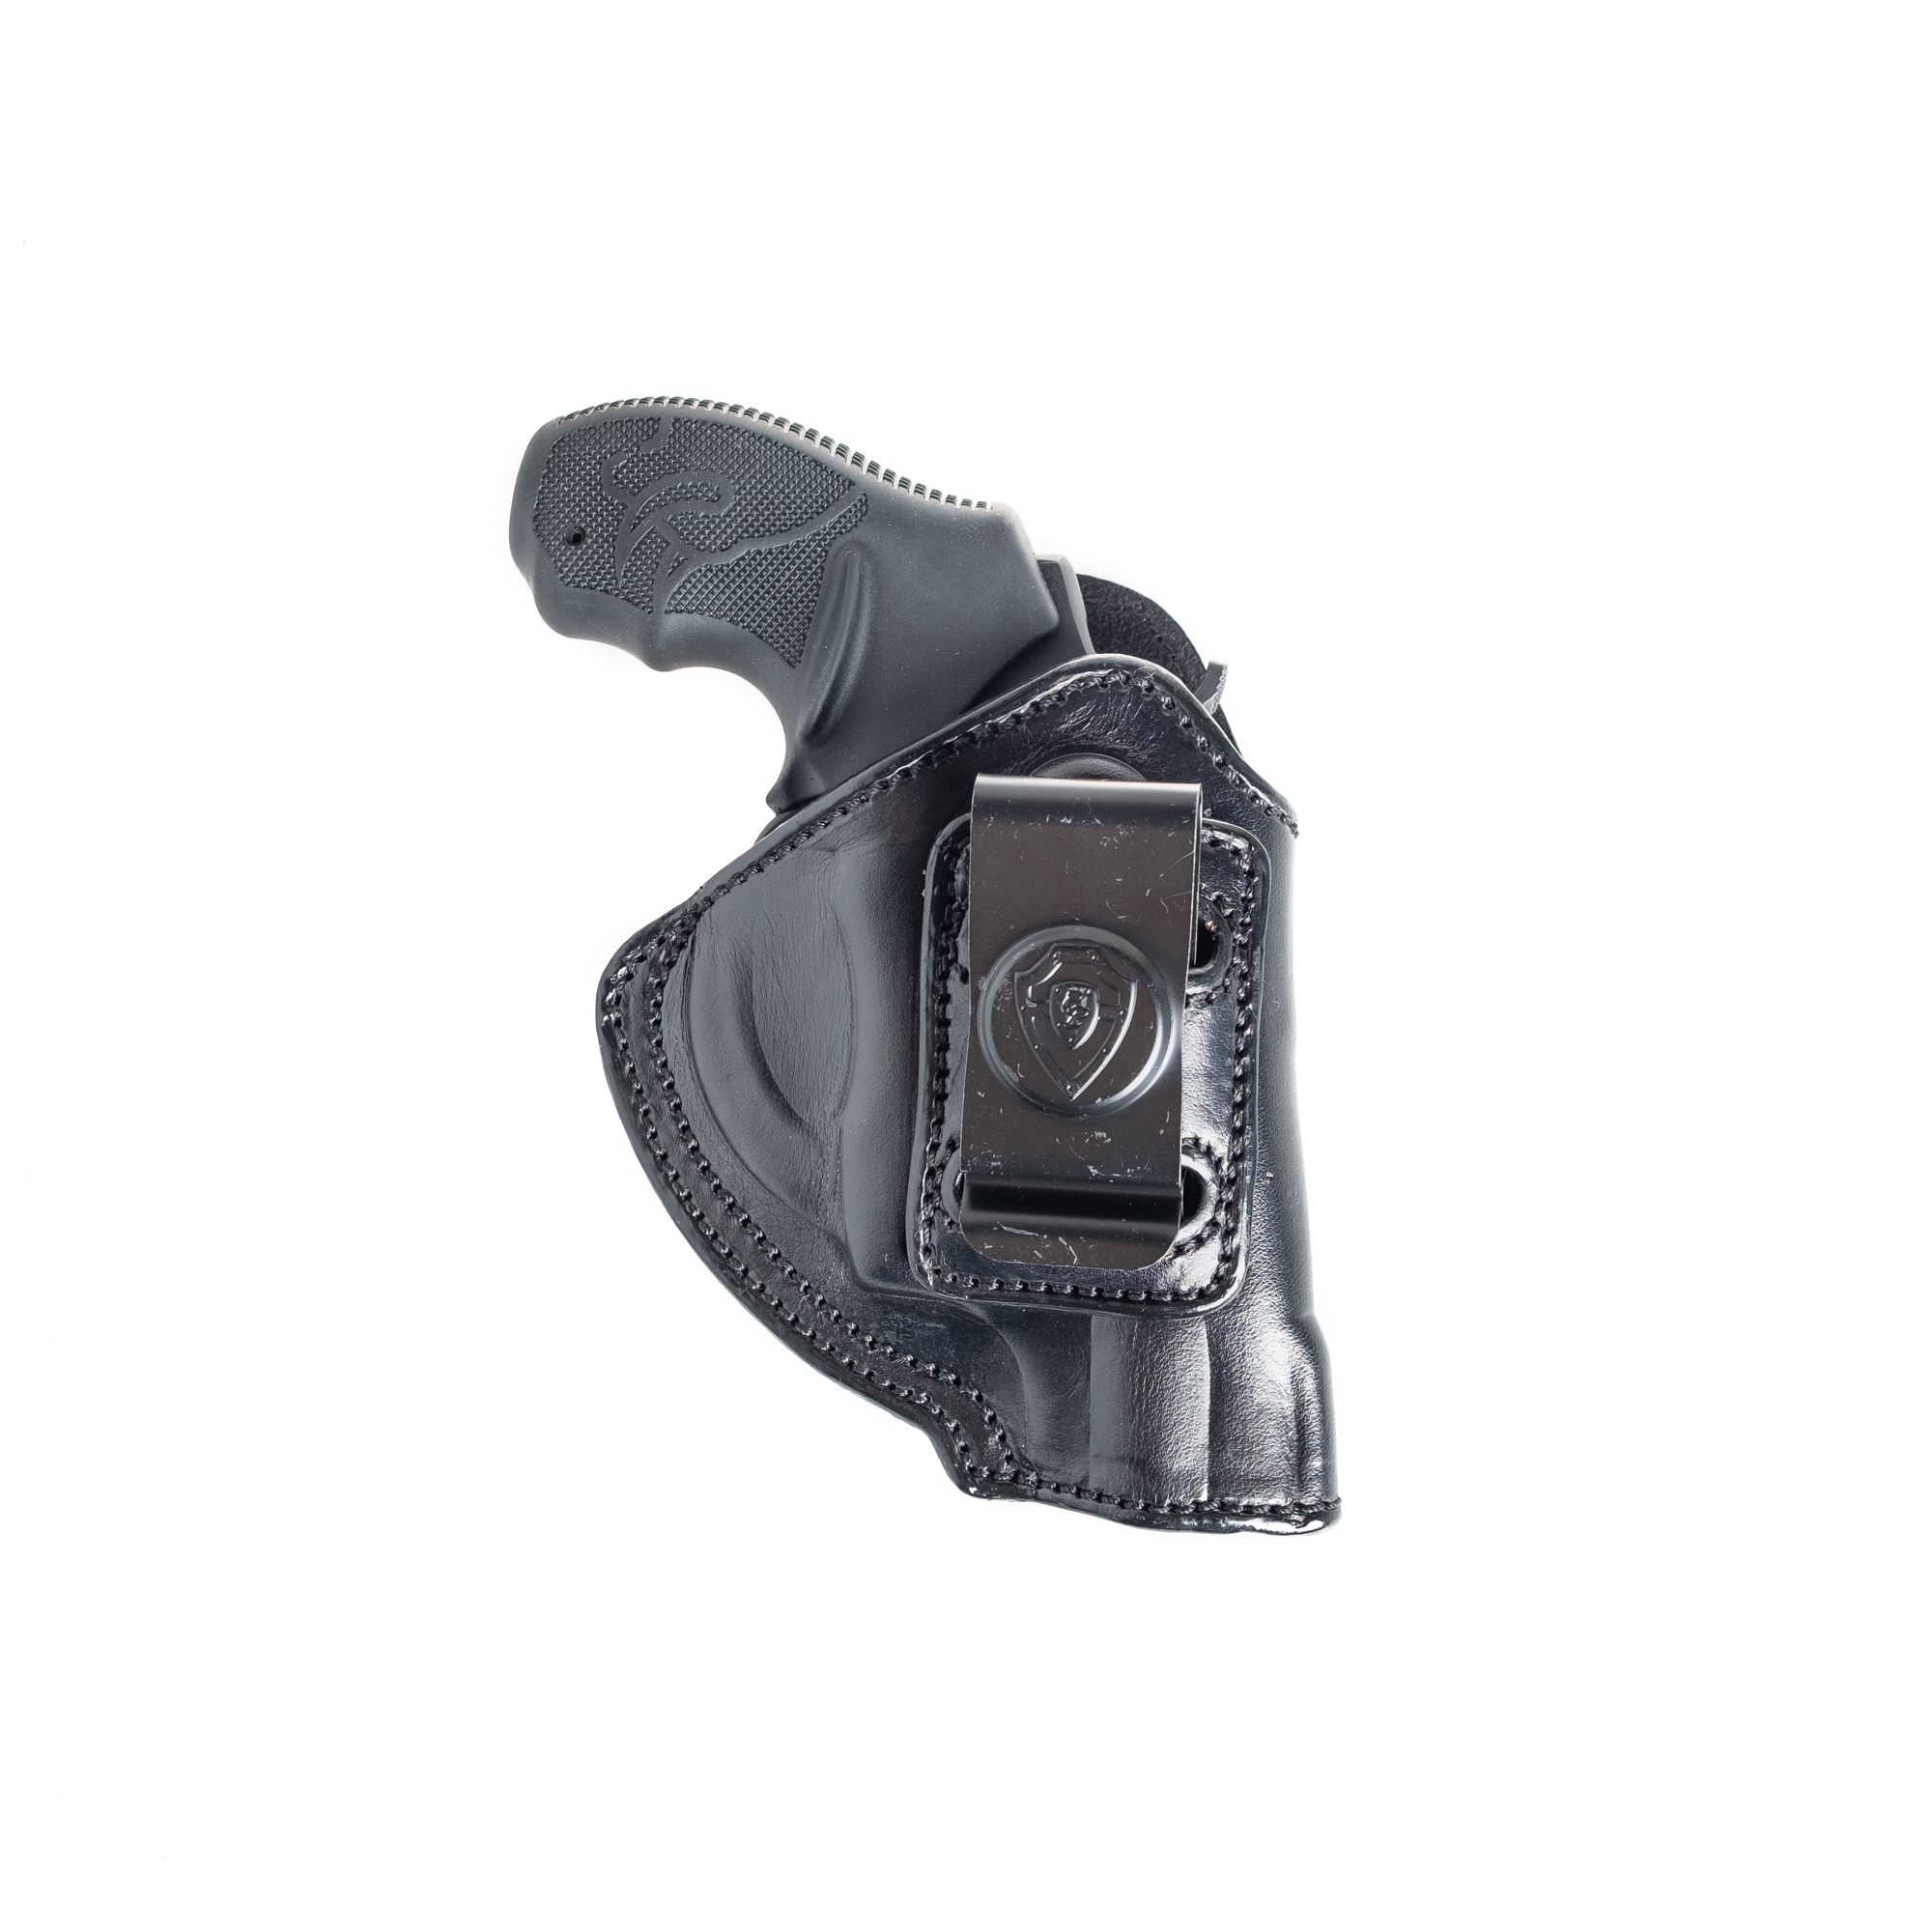 Inside the waistband leather holster for ruger SP101 2.2". 